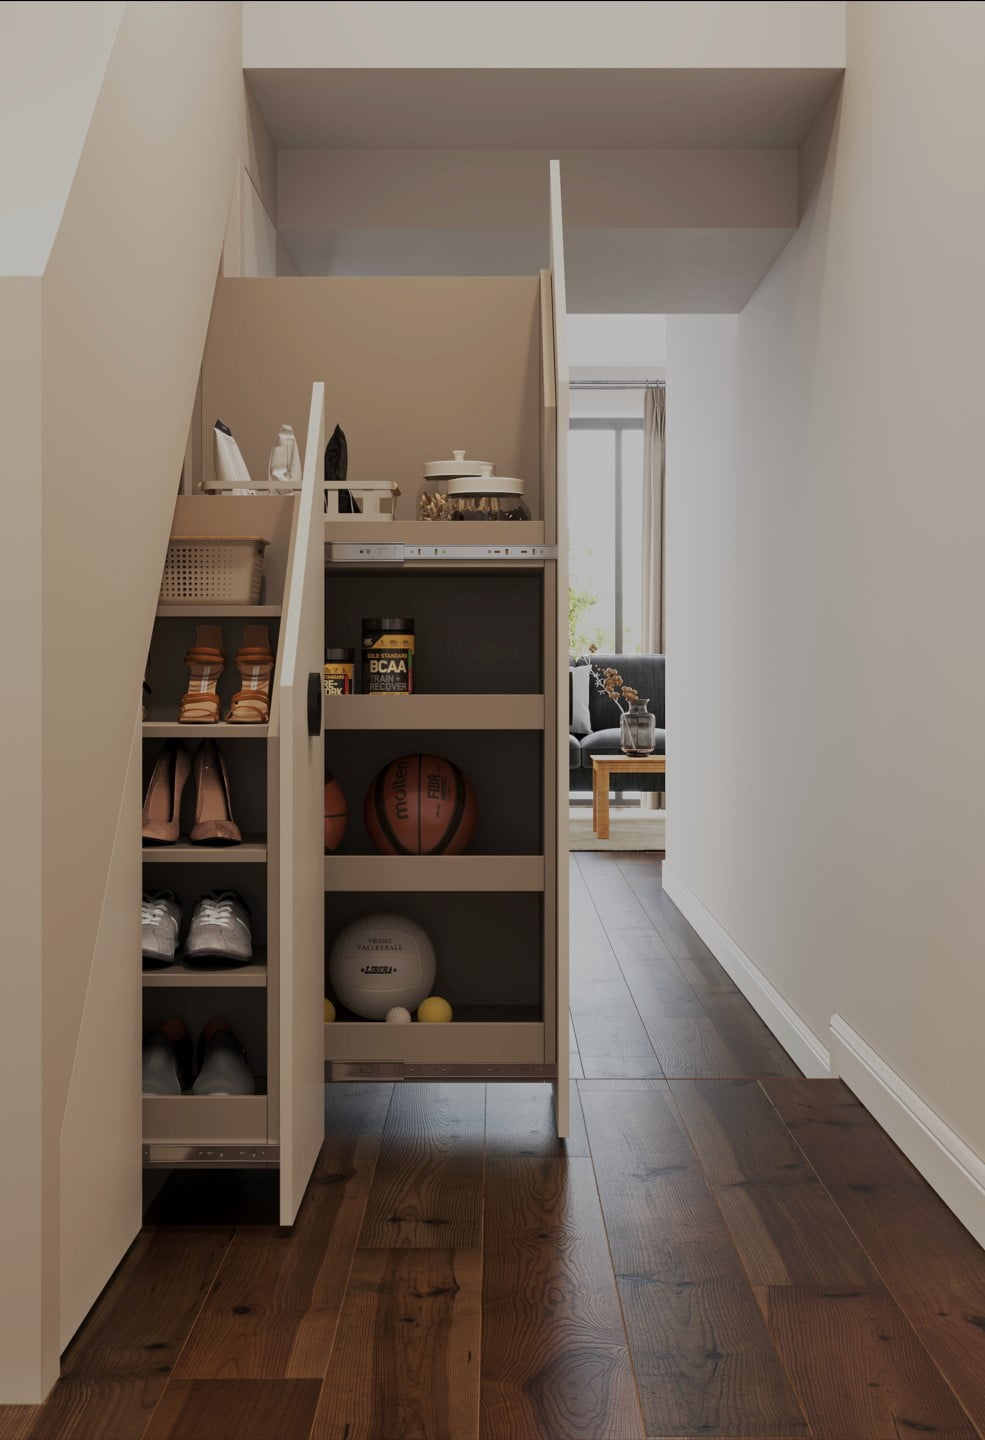 How Much Does Under Stairs Storage Cost in 2023?